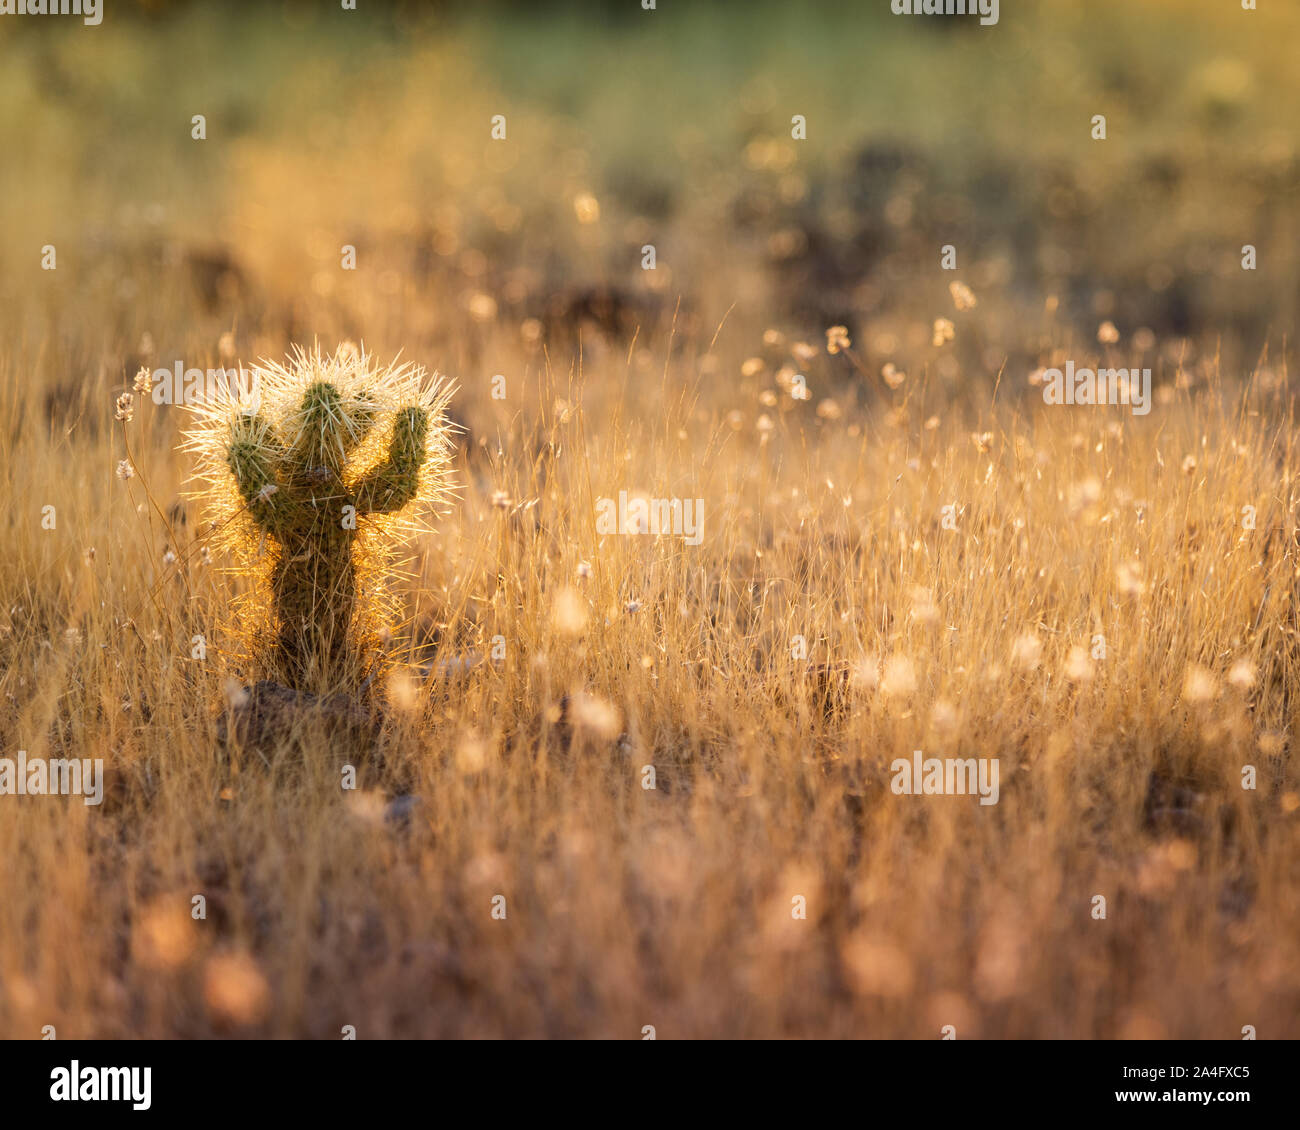 Desert landscape photo of a single baby cholla back lit by the sun and standing on a field of dry grass. Stock Photo